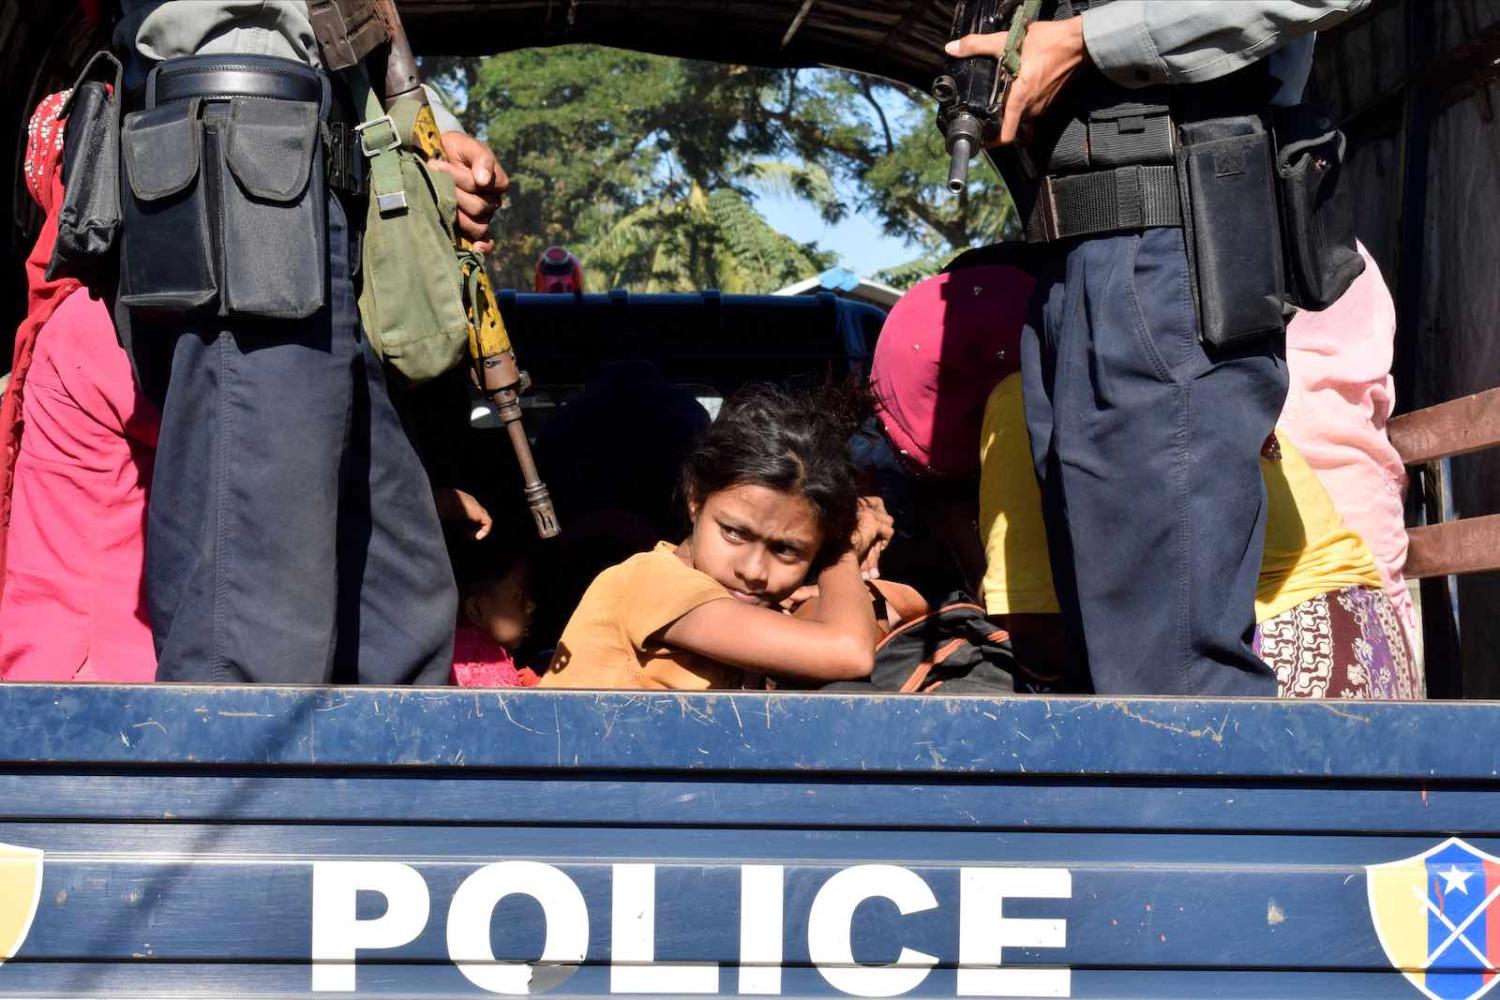 Myanmar police escort Rohingya back to their camp in Sittwe, Rakhine state, after being detained at sea, November 2018 (Photo: AFP/Getty Images)